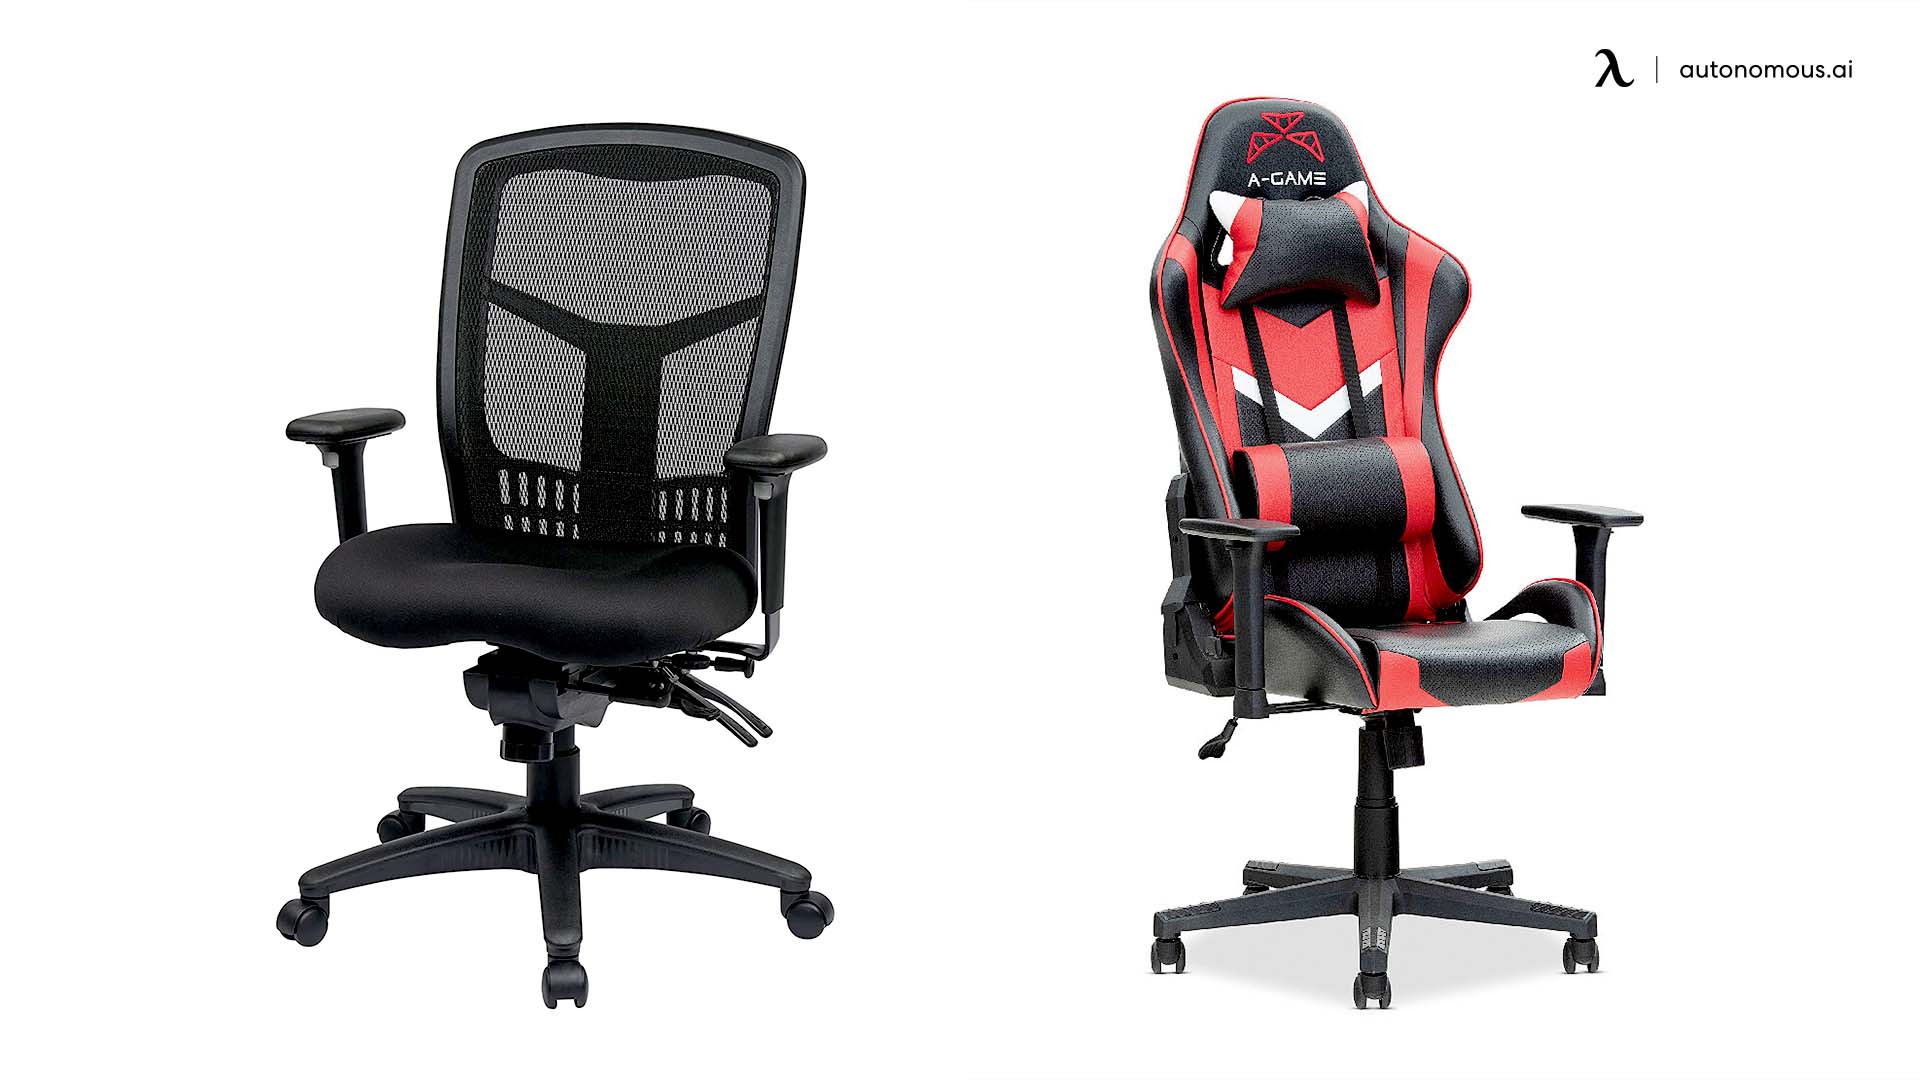 Cheap vs Expensive Gaming Chair: Differences